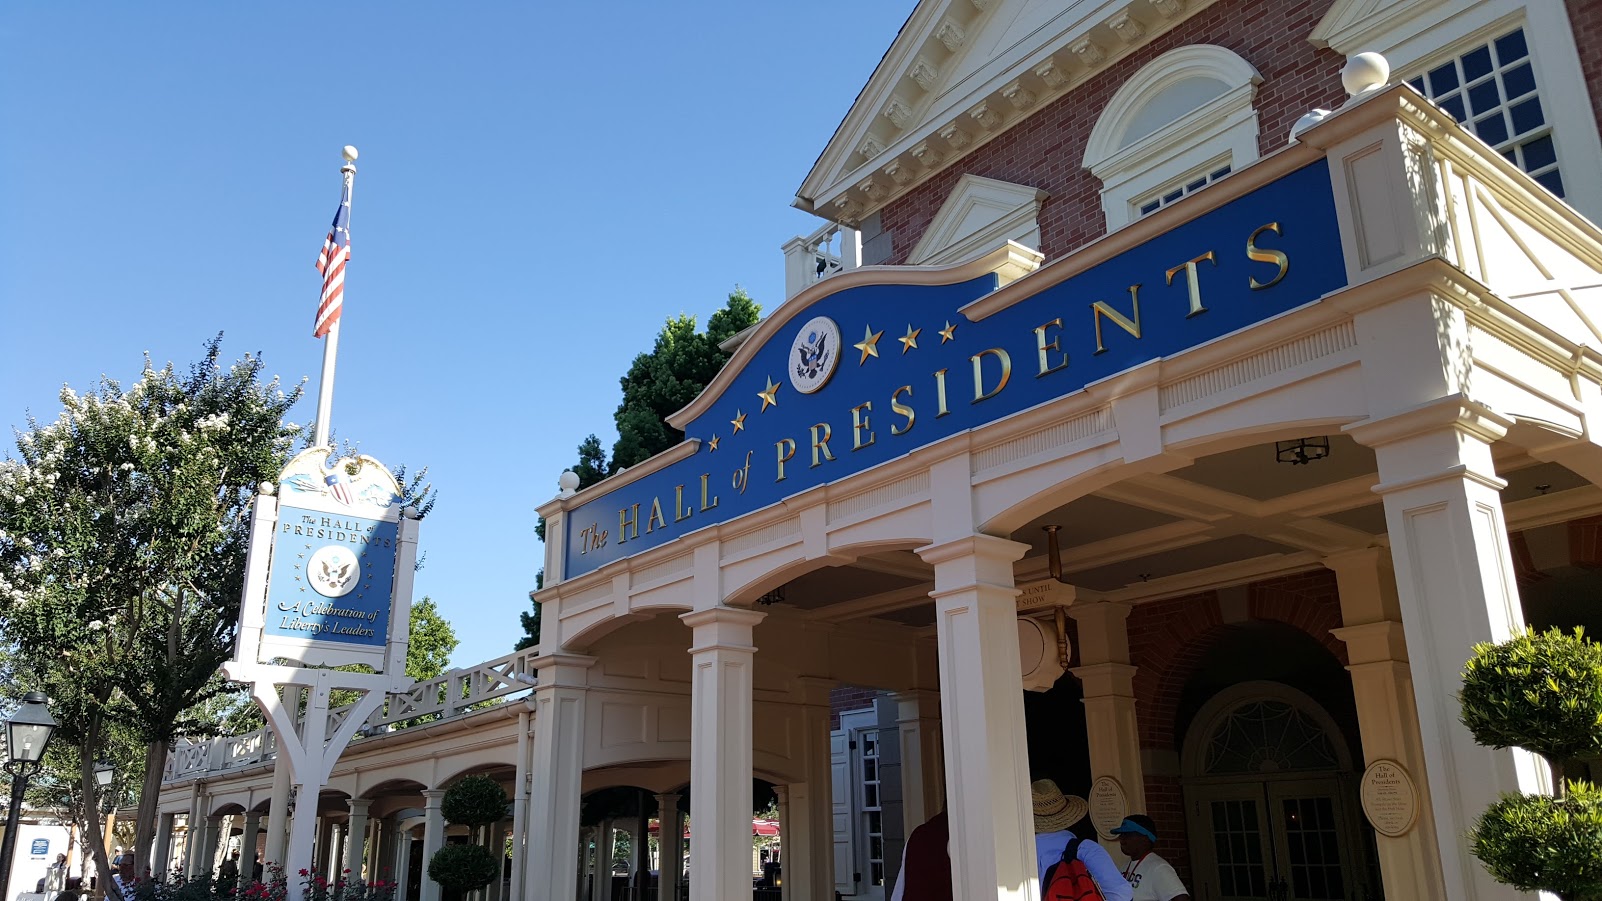 Donald Trump is coming soon to Disney’s Hall of Presidents